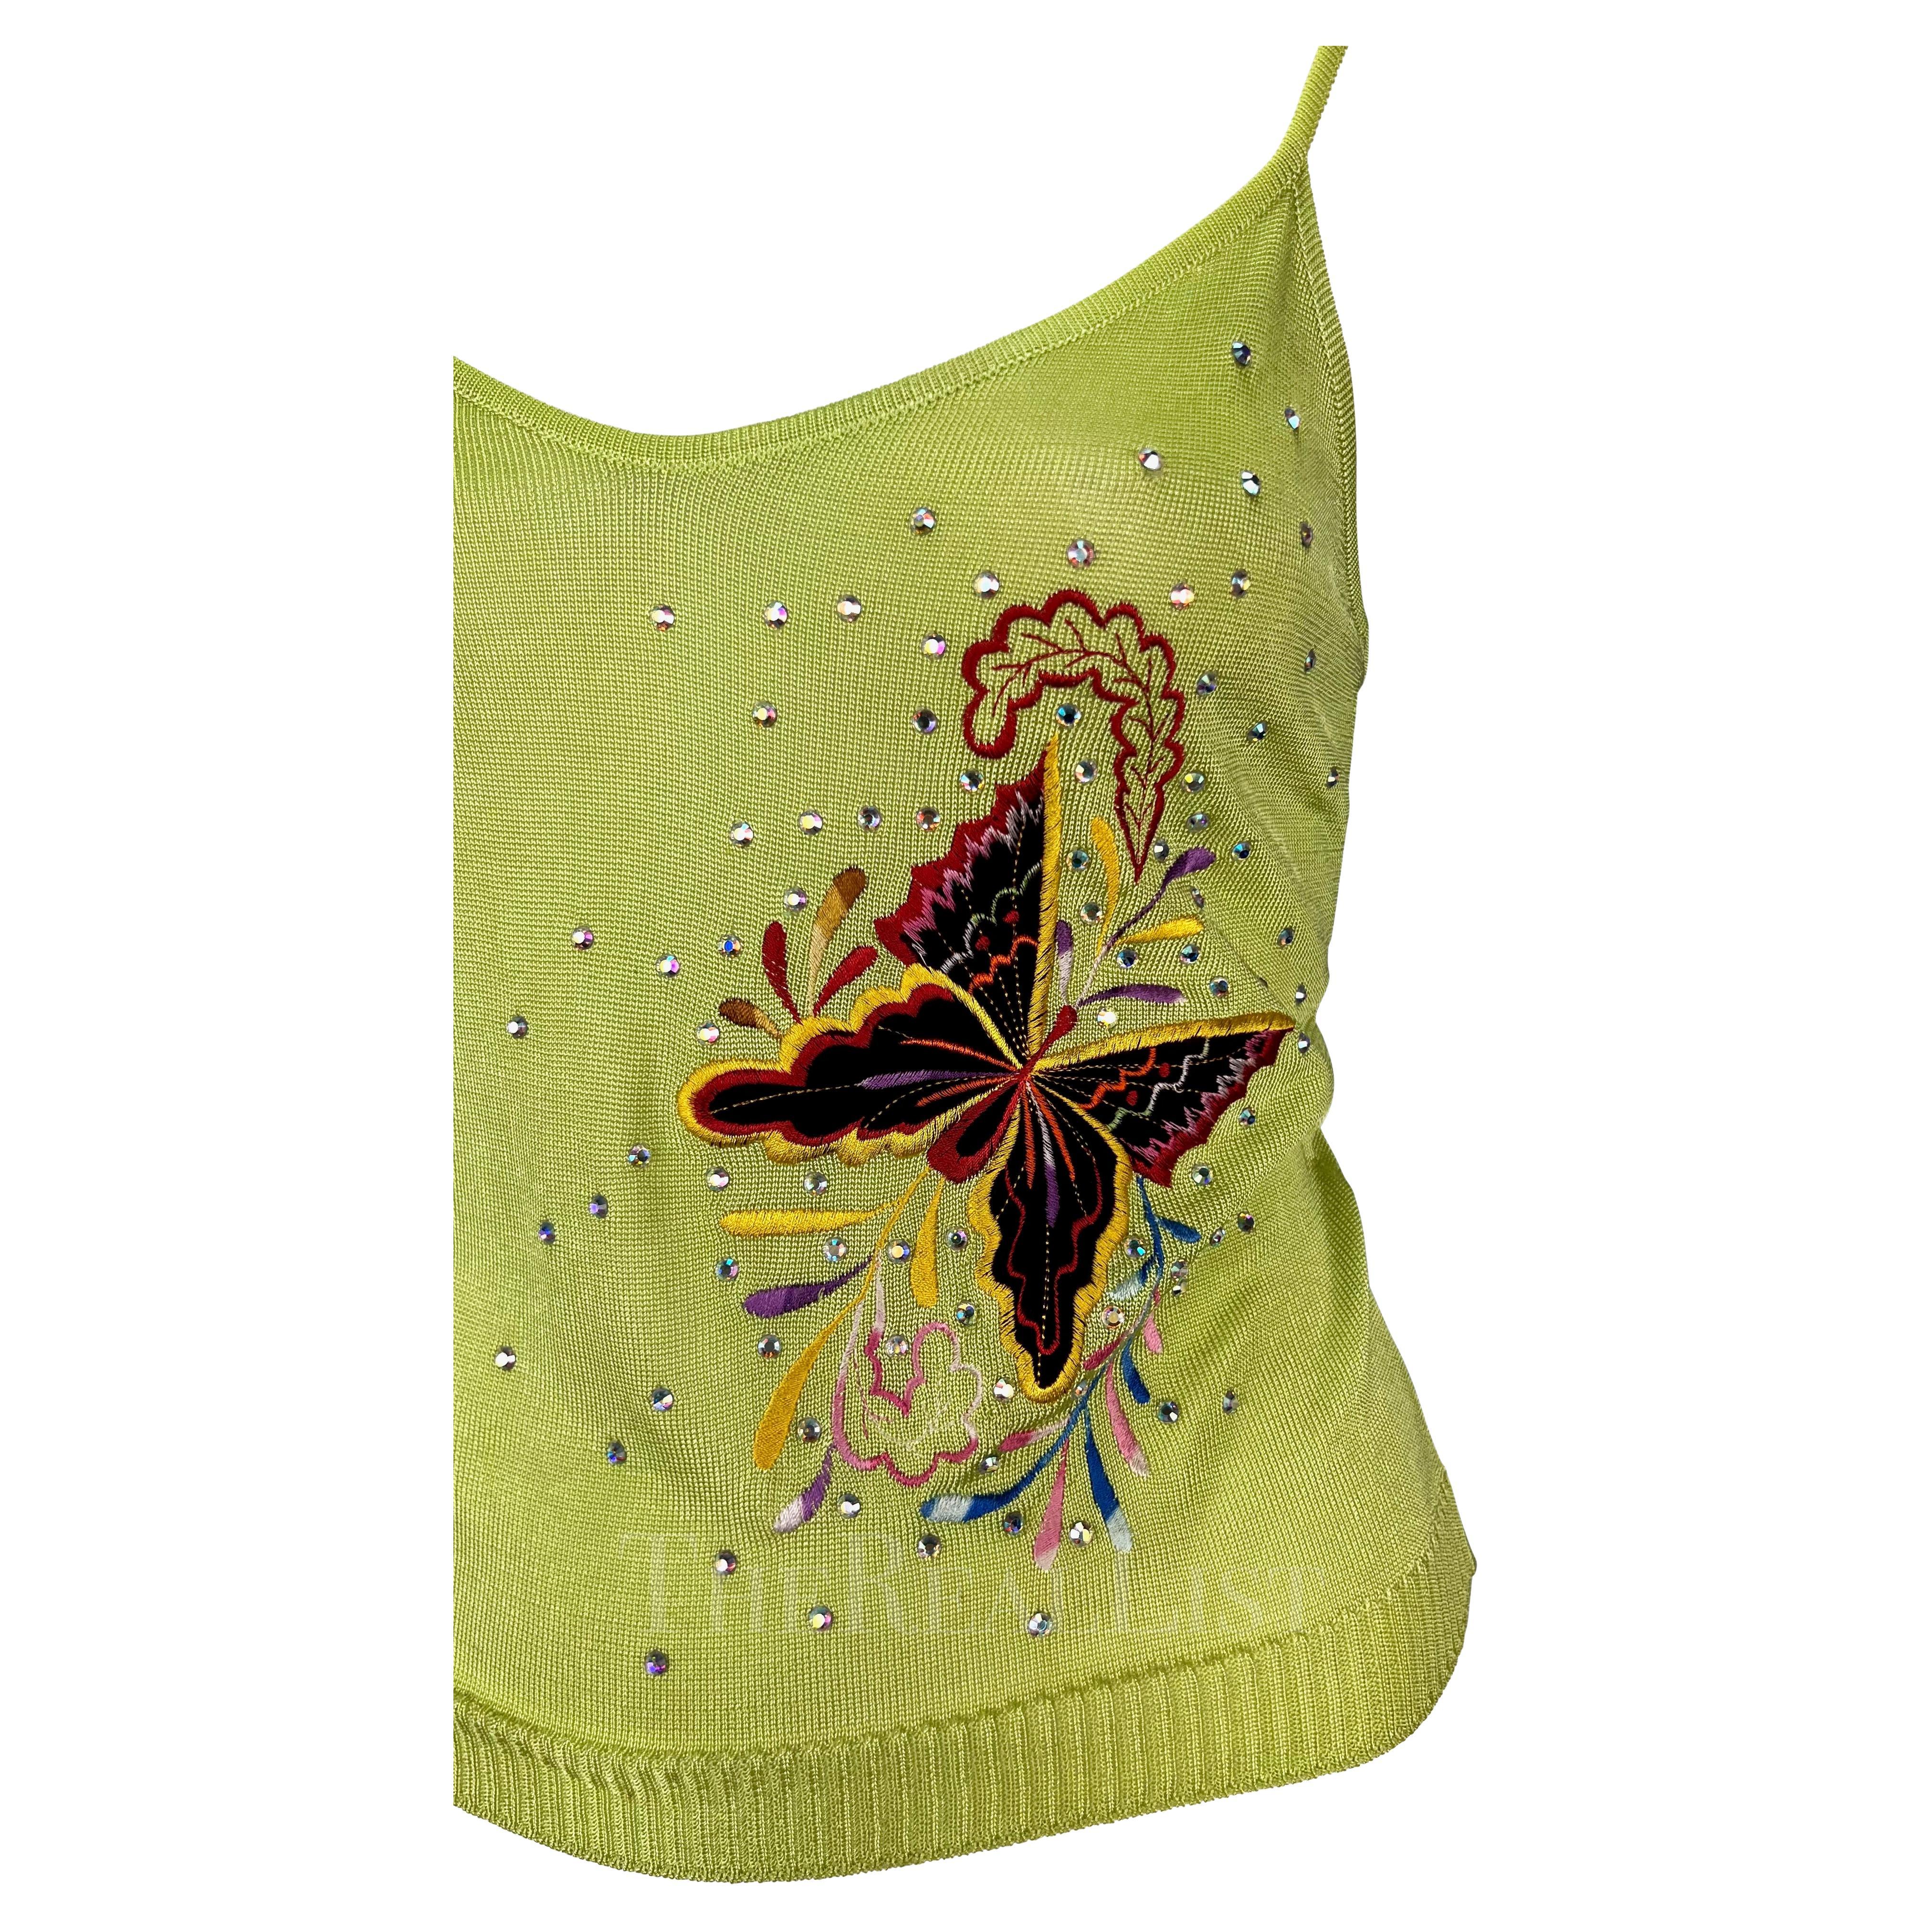 Women's S/S 2002 Christian Dior by John Galliano Butterfly Embellished Knit Tank Top 